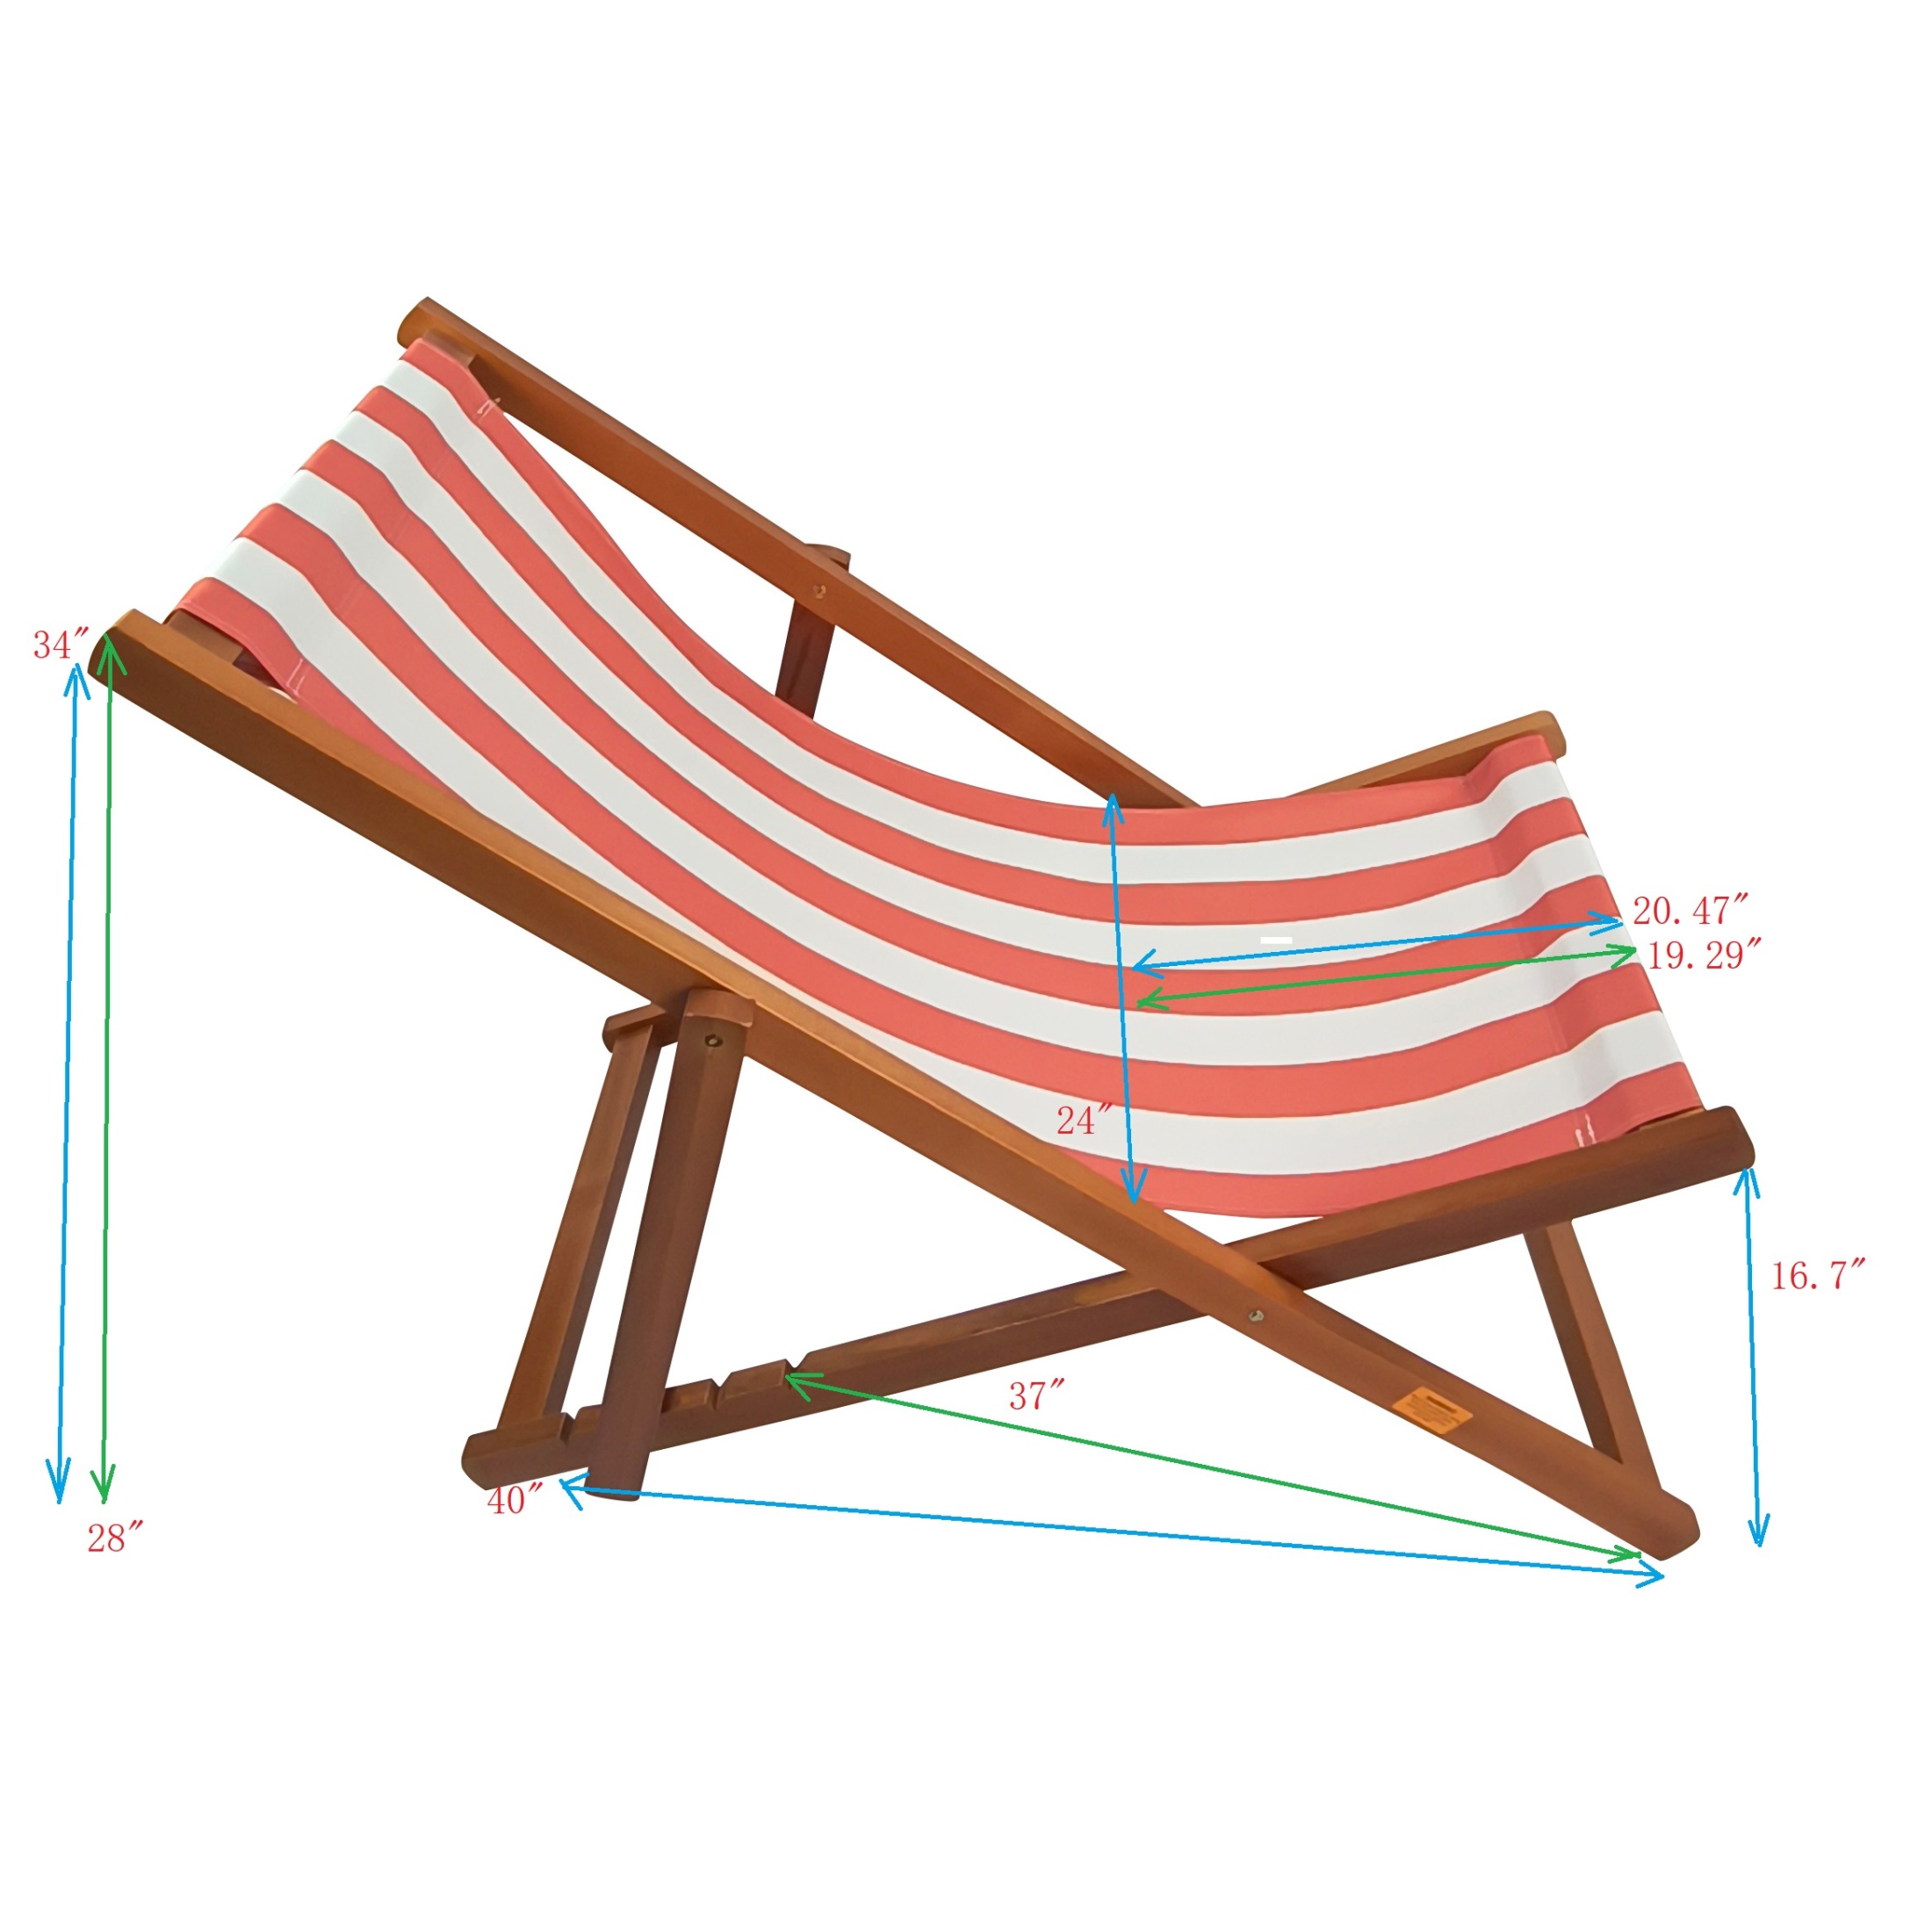 Pouseayar Foldable Sling Chair,Outdoor Beach Chair Chaise Lounge, Orang - image 4 of 7